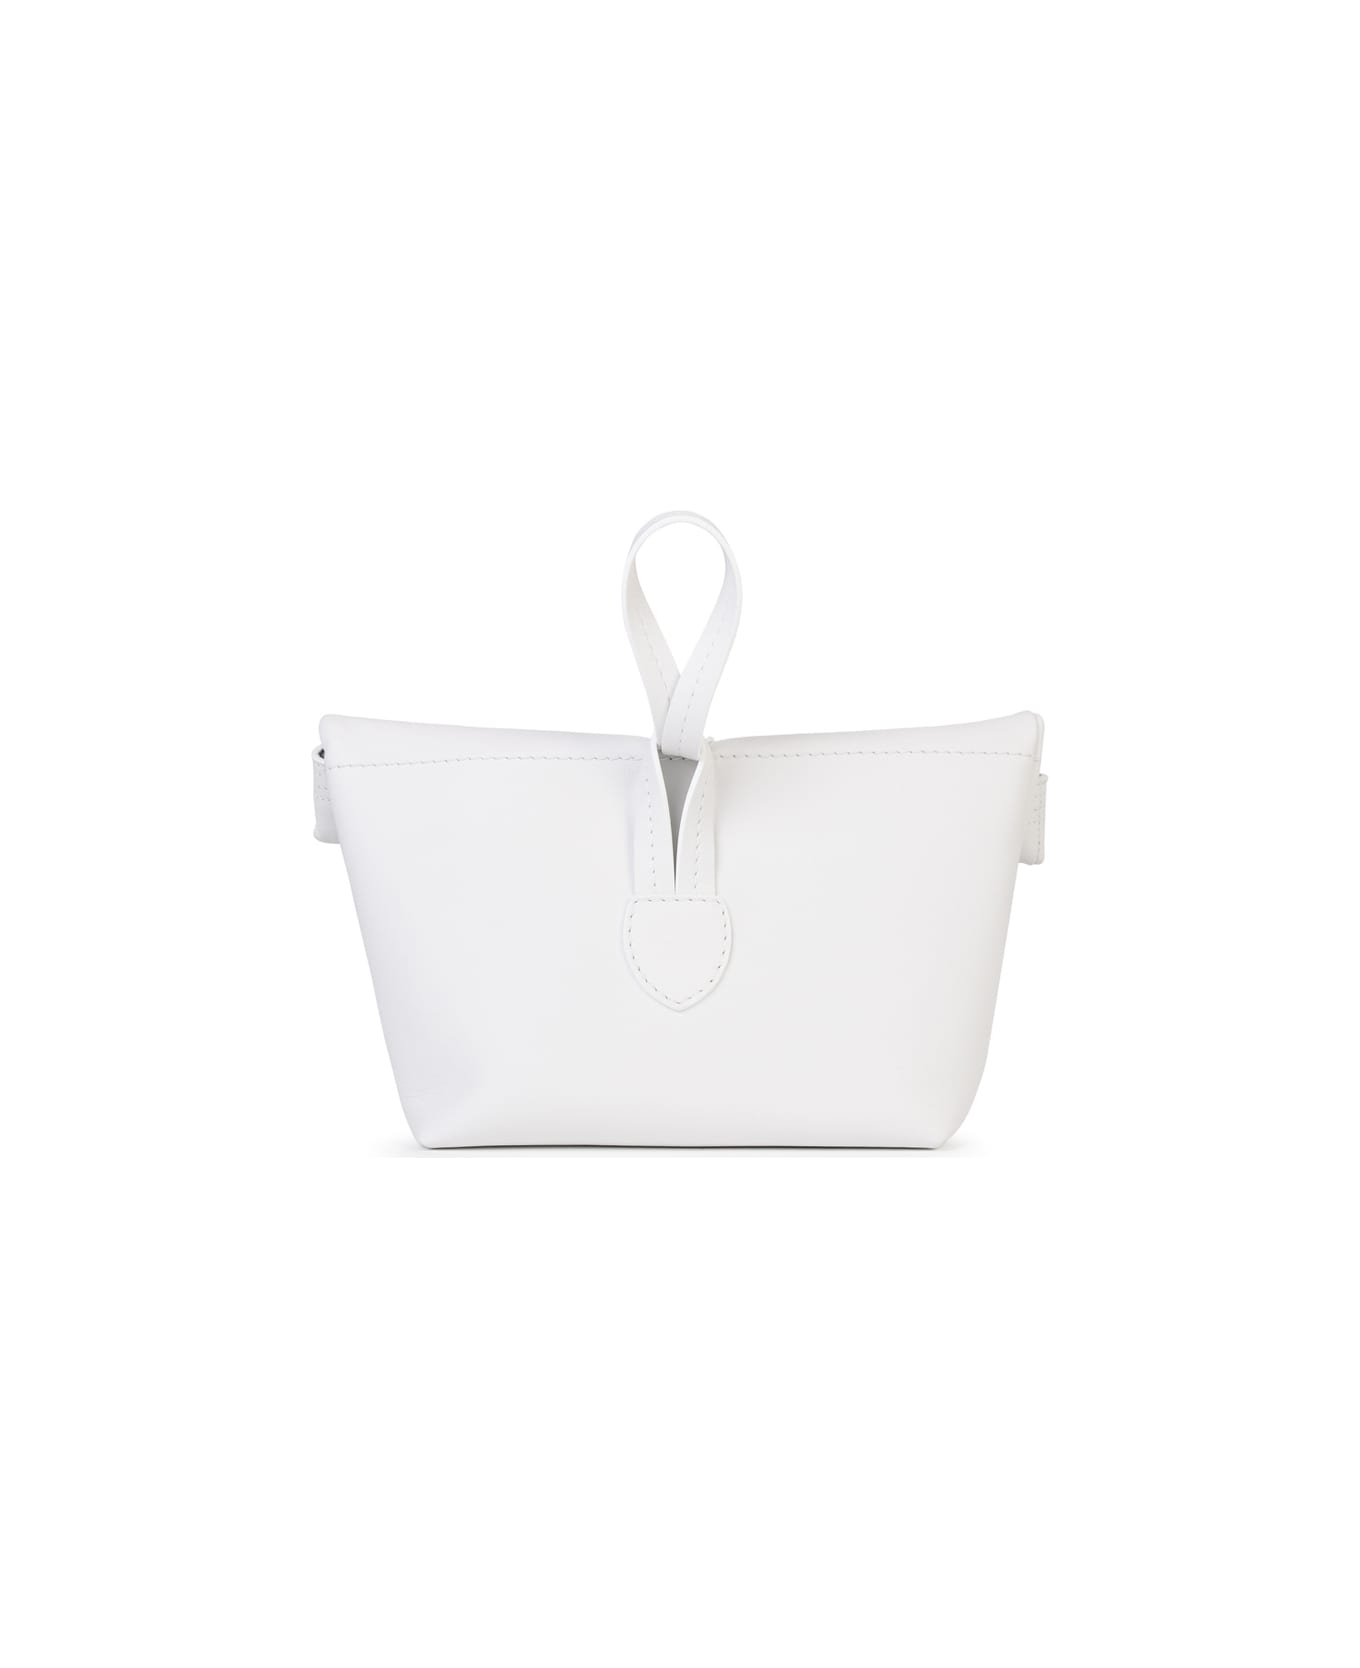 Maison Margiela Clutch In White Leather - WHITE クラッチバッグ